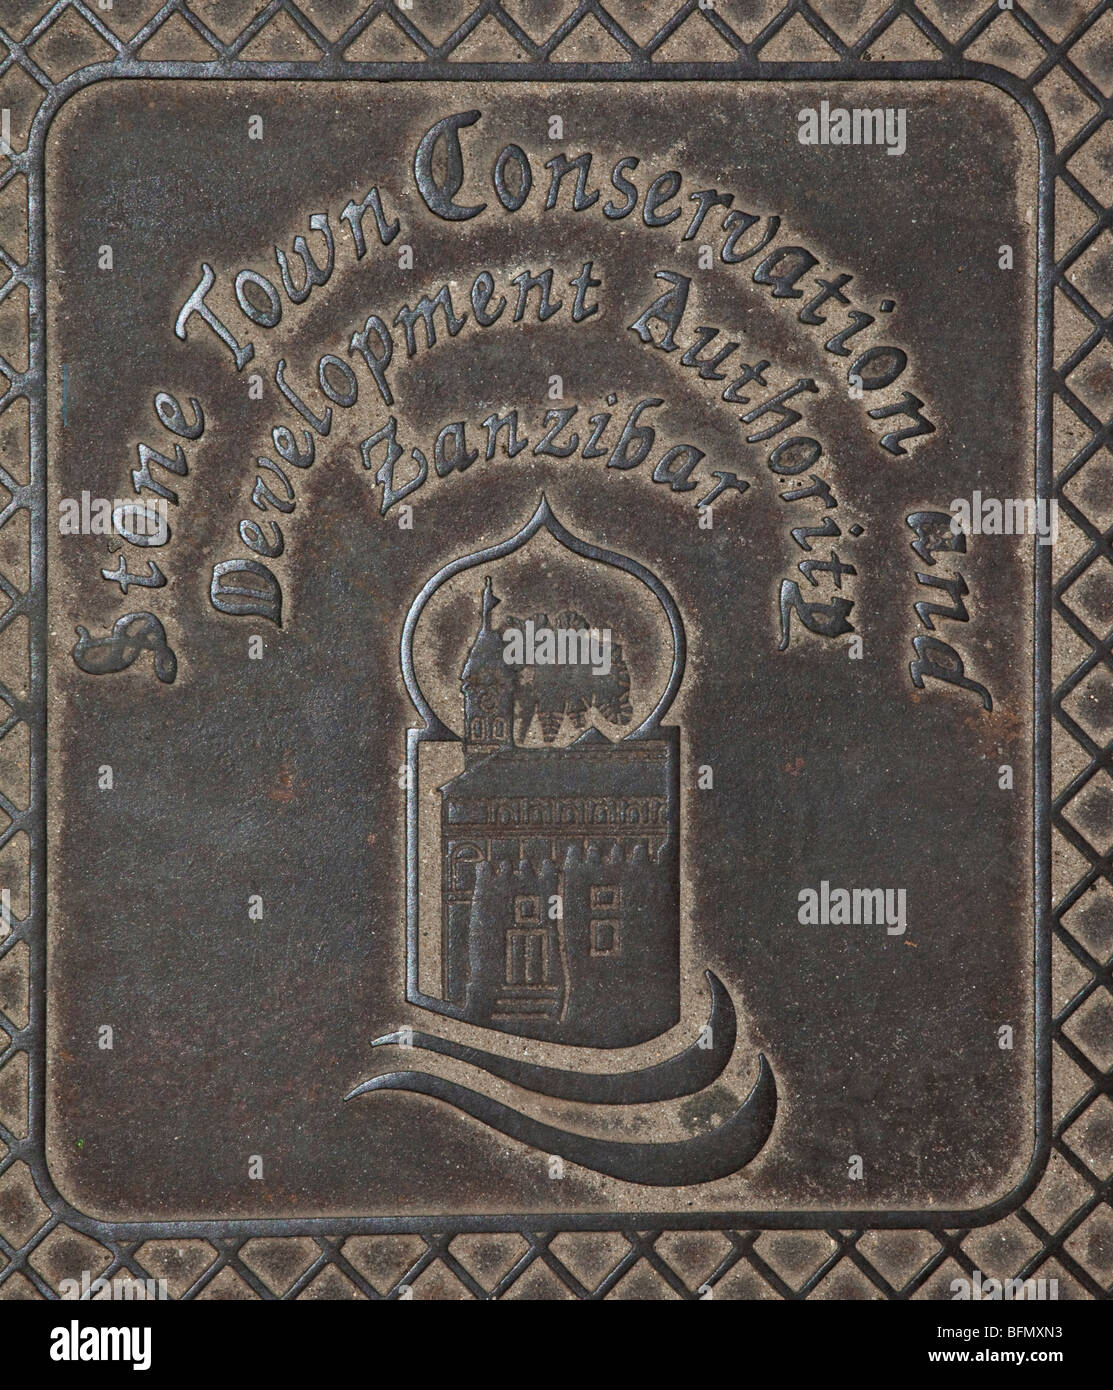 Tanzania, Zanzibar, Stone Town. A manhole cover in Stone Town highlighting the important contribution made by the Aga Khan Trust Stock Photo